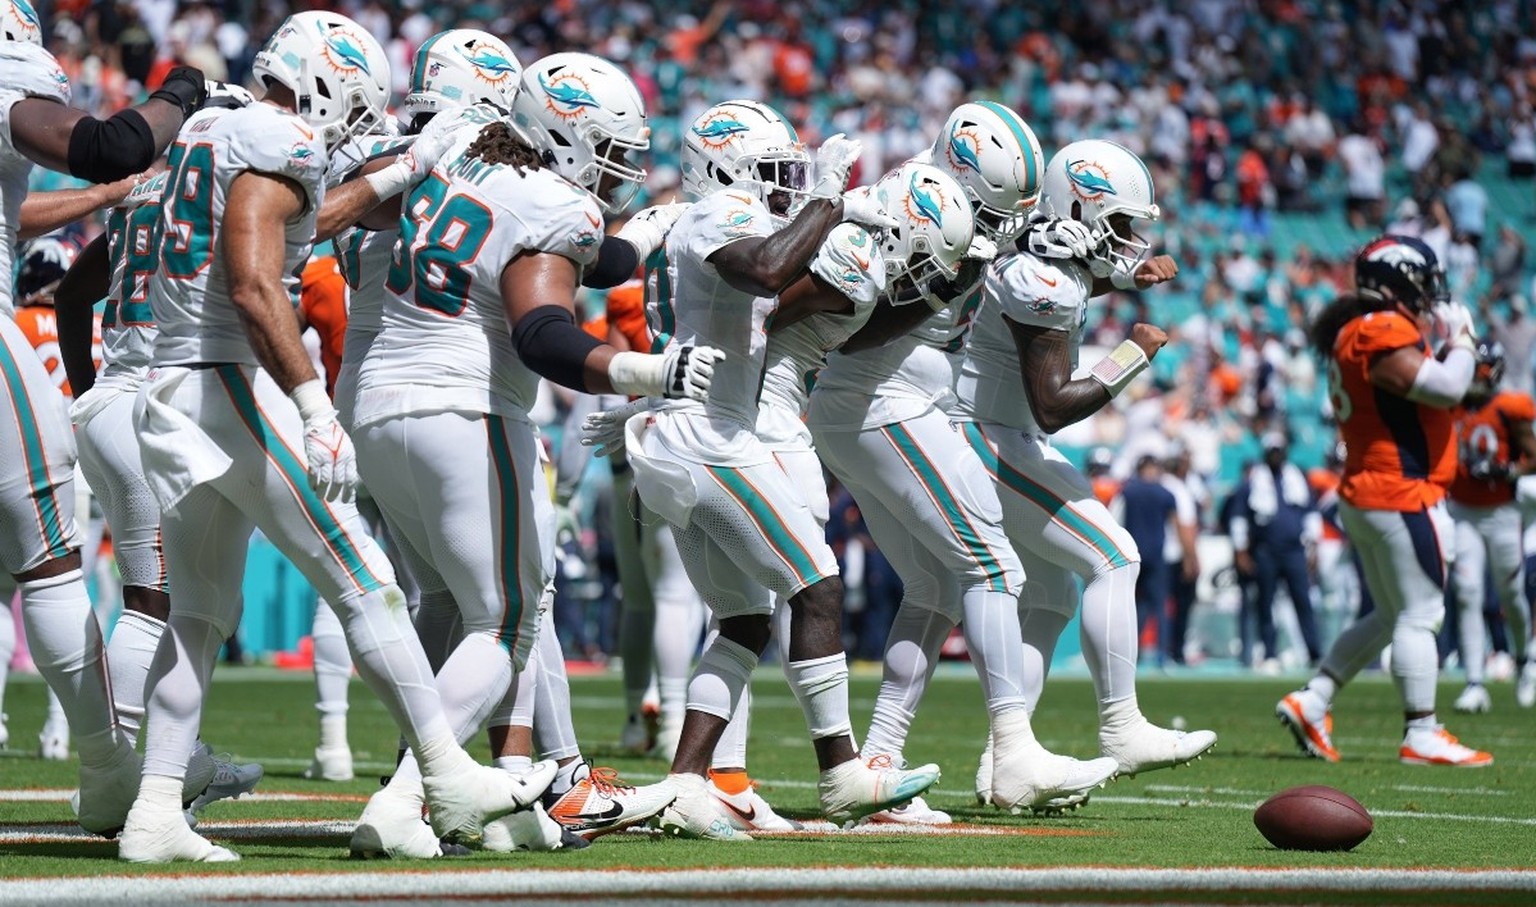 IMAGO / USA TODAY Network

Syndication: Palm Beach Post The Miami Dolphins offense does a dance routine after scoring against the Denver Broncos in the second quarter of an NFL, American Football Herr ...